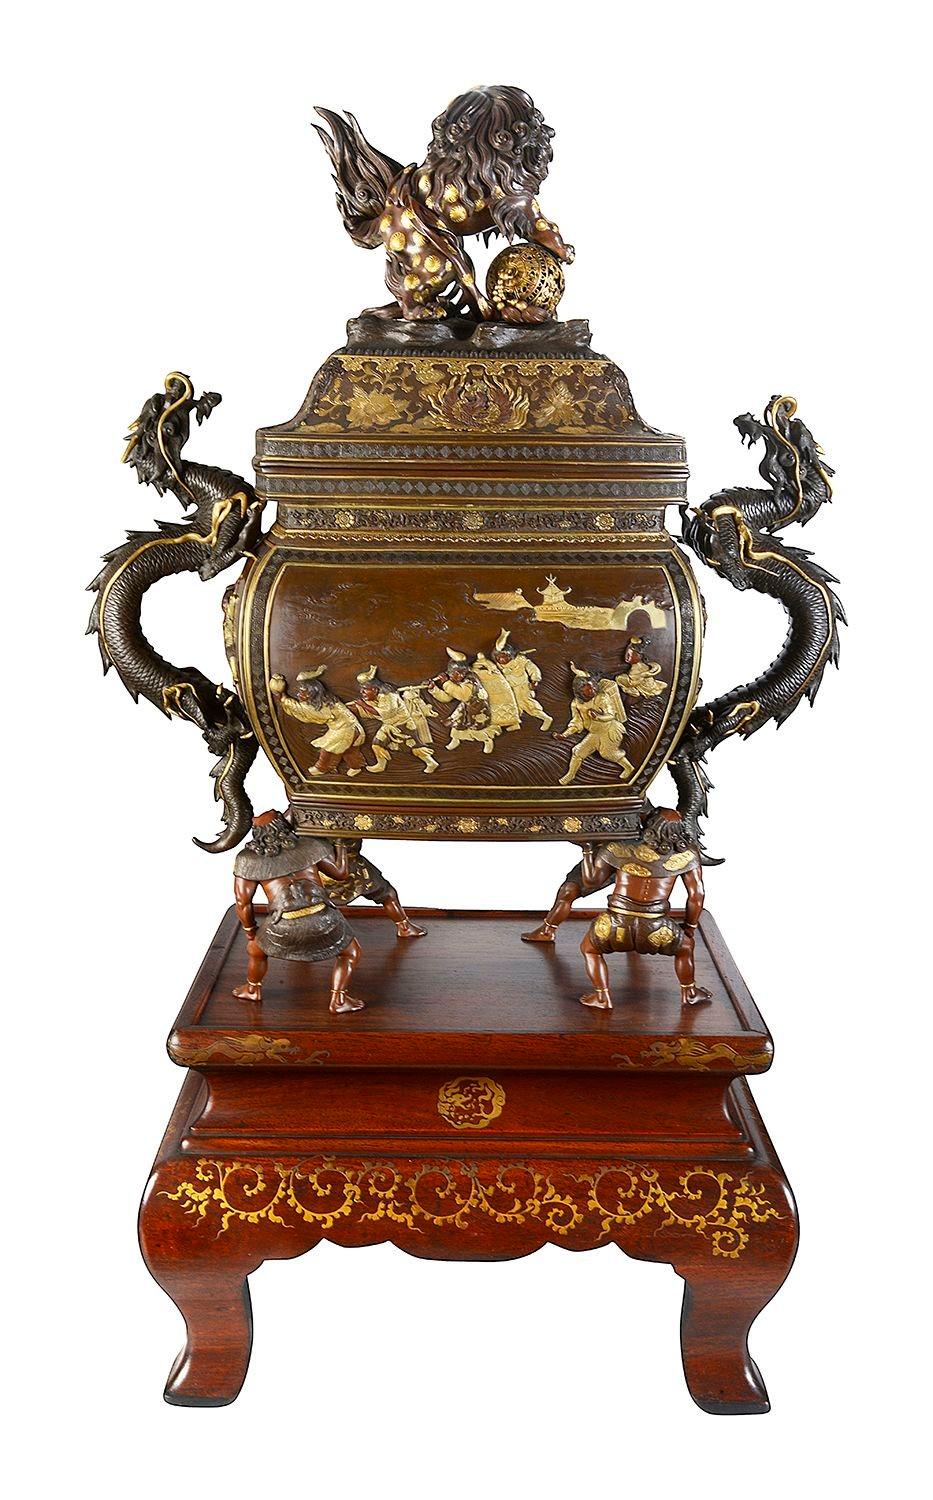 A magnificent Japanese Meiji period (1868-1912) patinated bronze overlay Koro on stand. The body of bellied rectangular section, the sides molded in low relief with various figural scenes, flanked by sinuous dragon-form handles, the domed cover